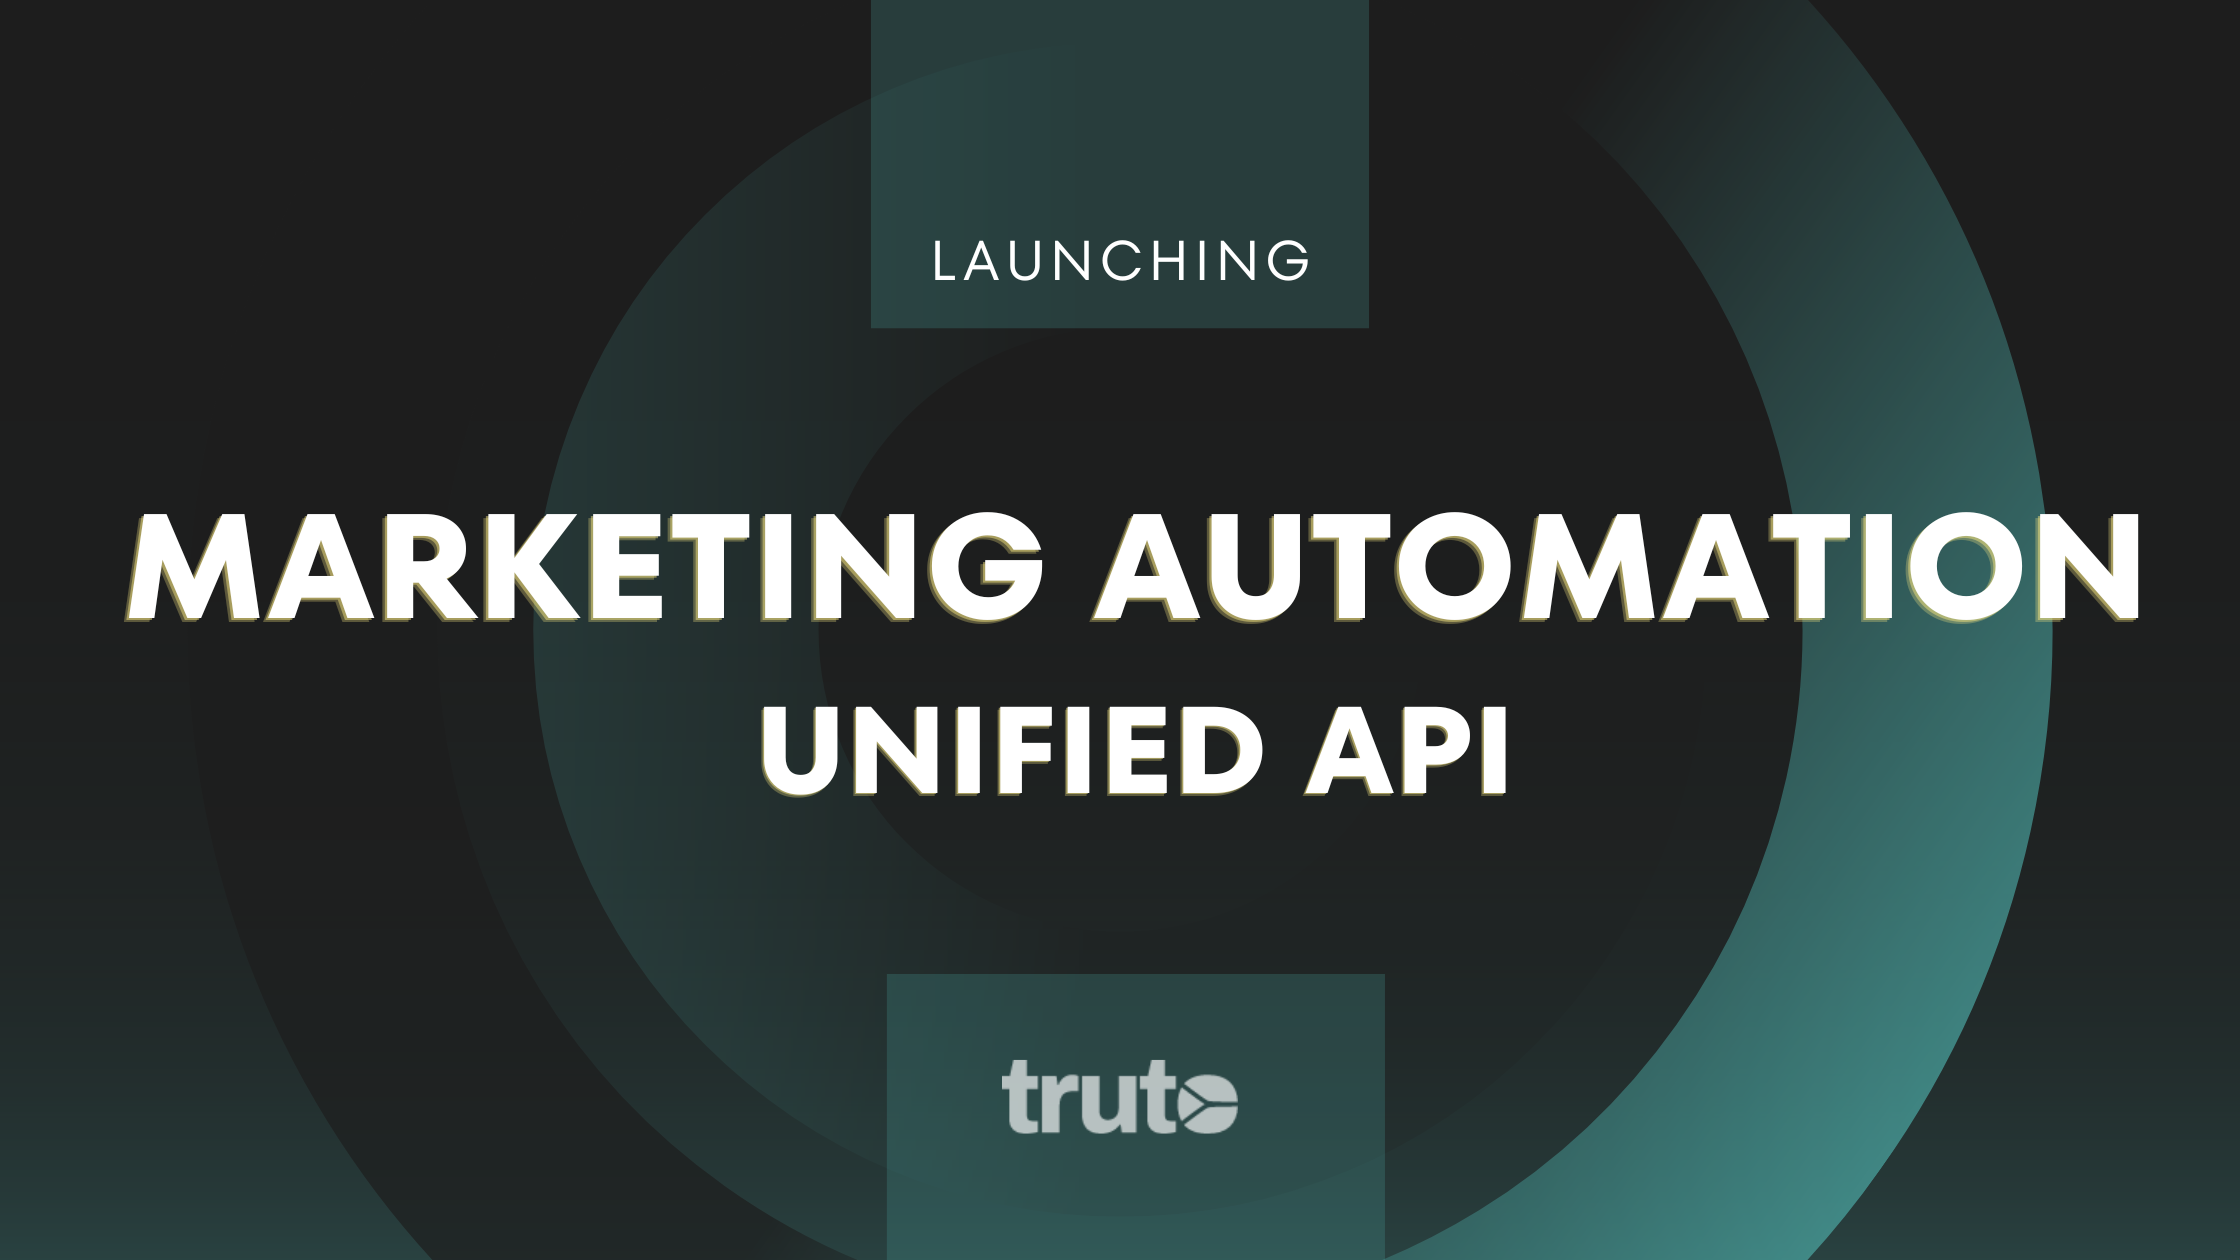 Truto's Marketing Automation Unified API Launch